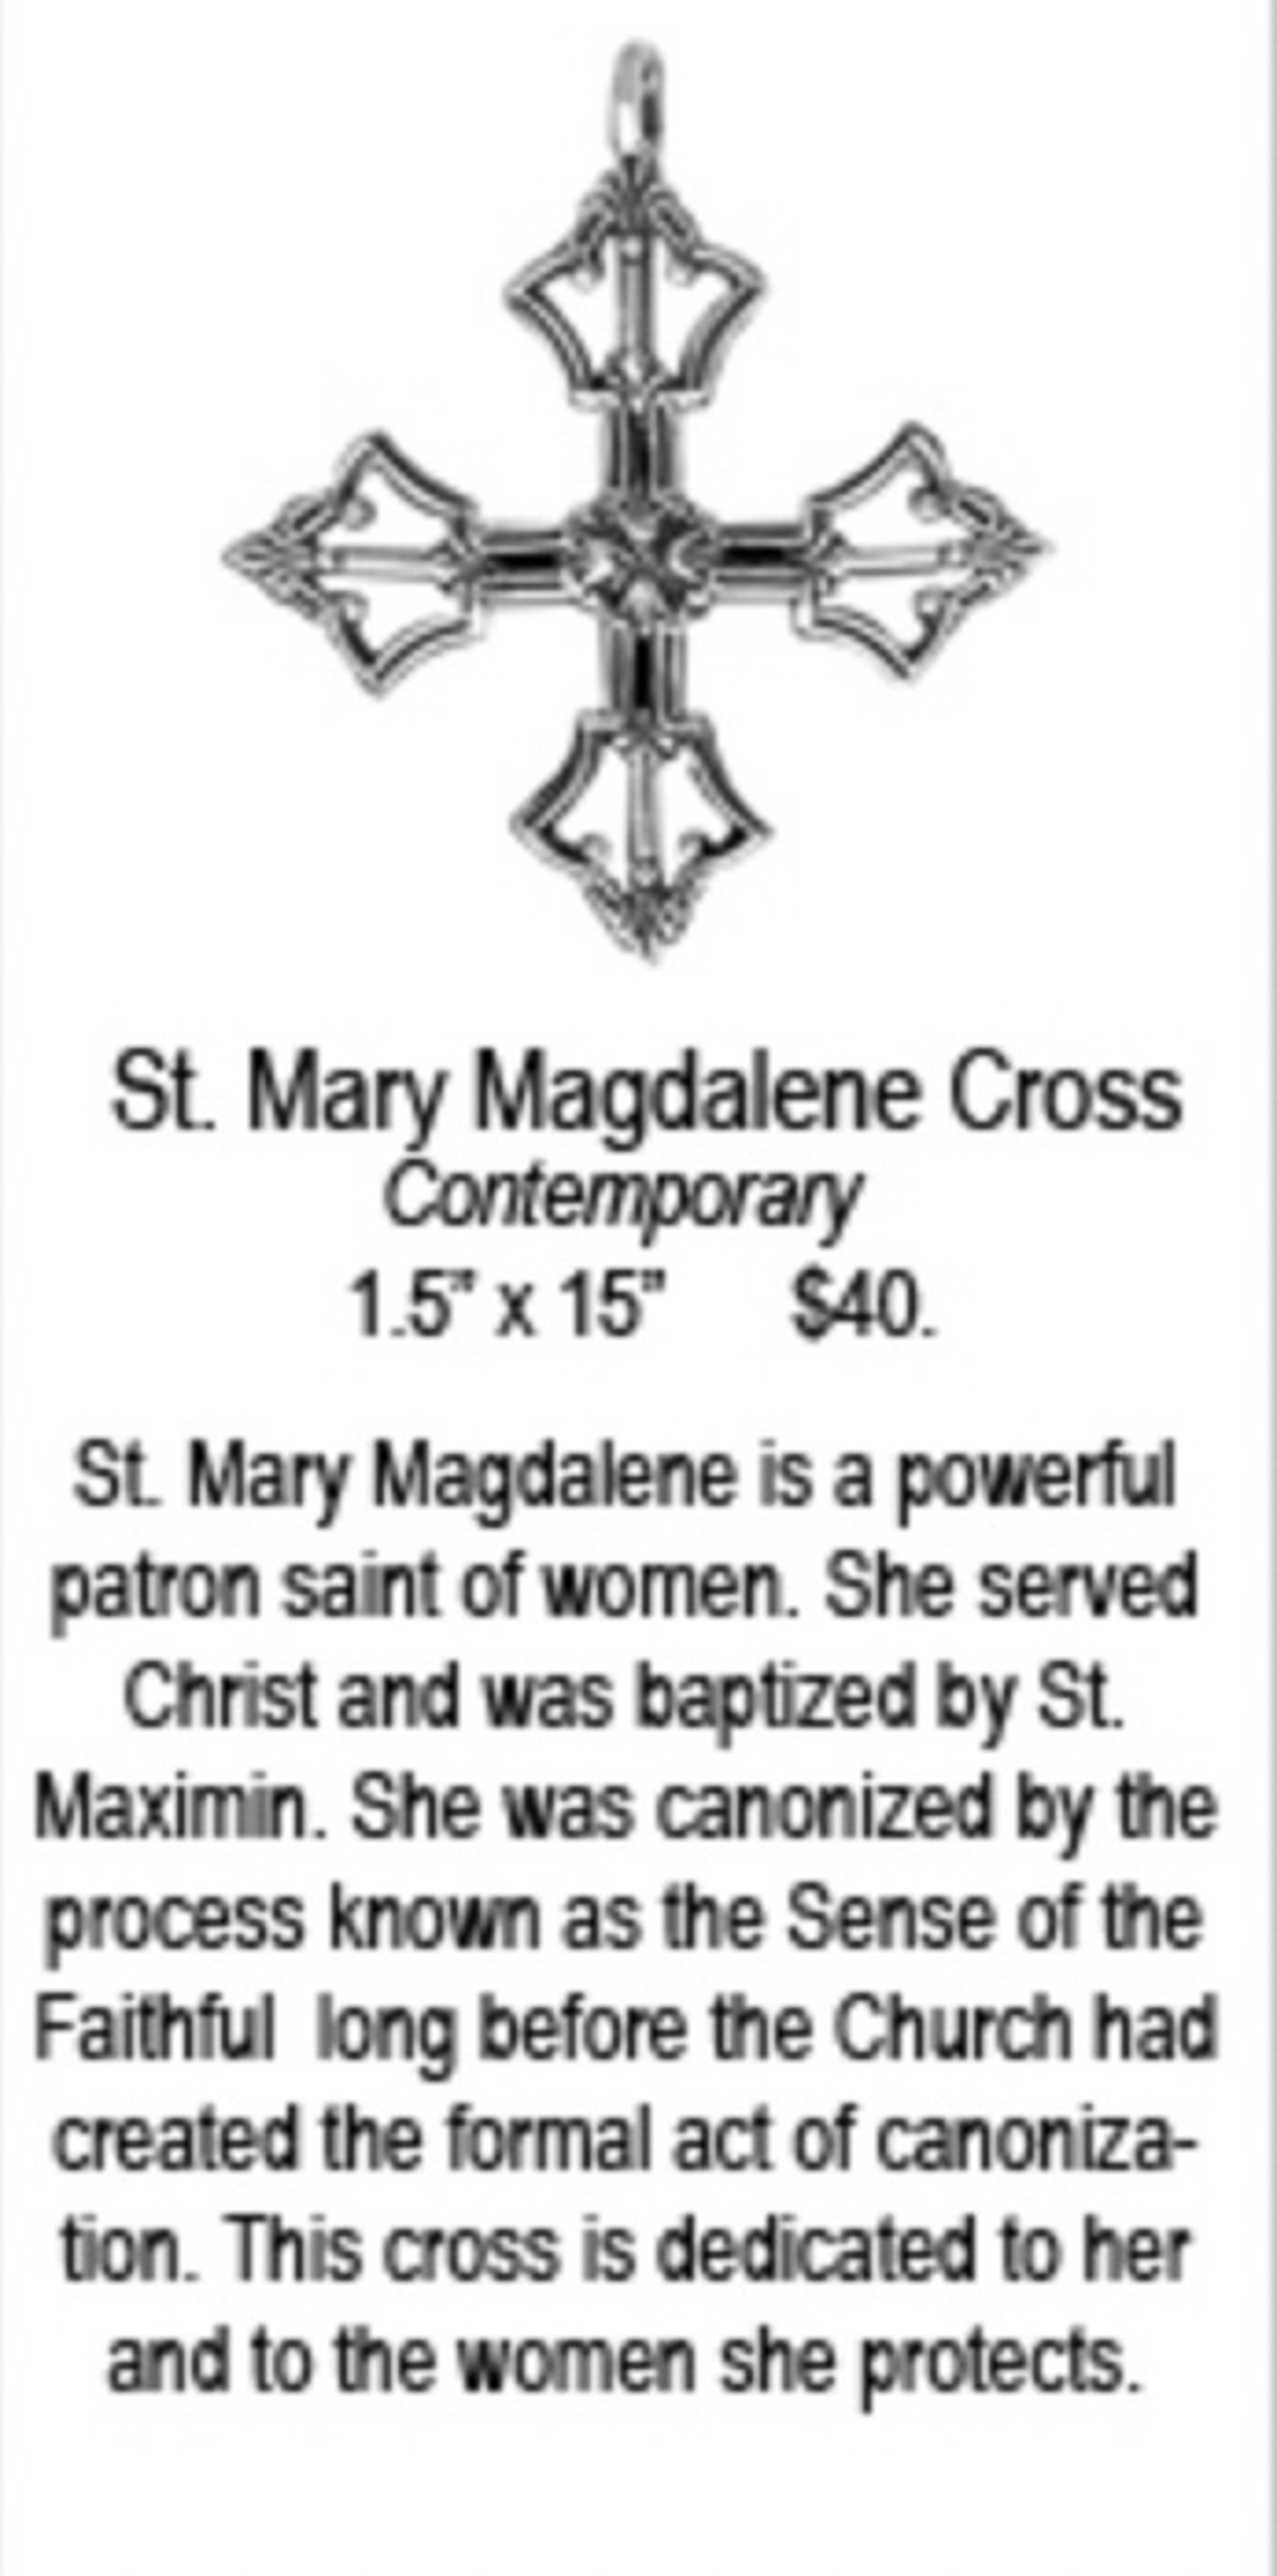 Cross - St. Mary Magdalene 9521 by Deanne McKeown